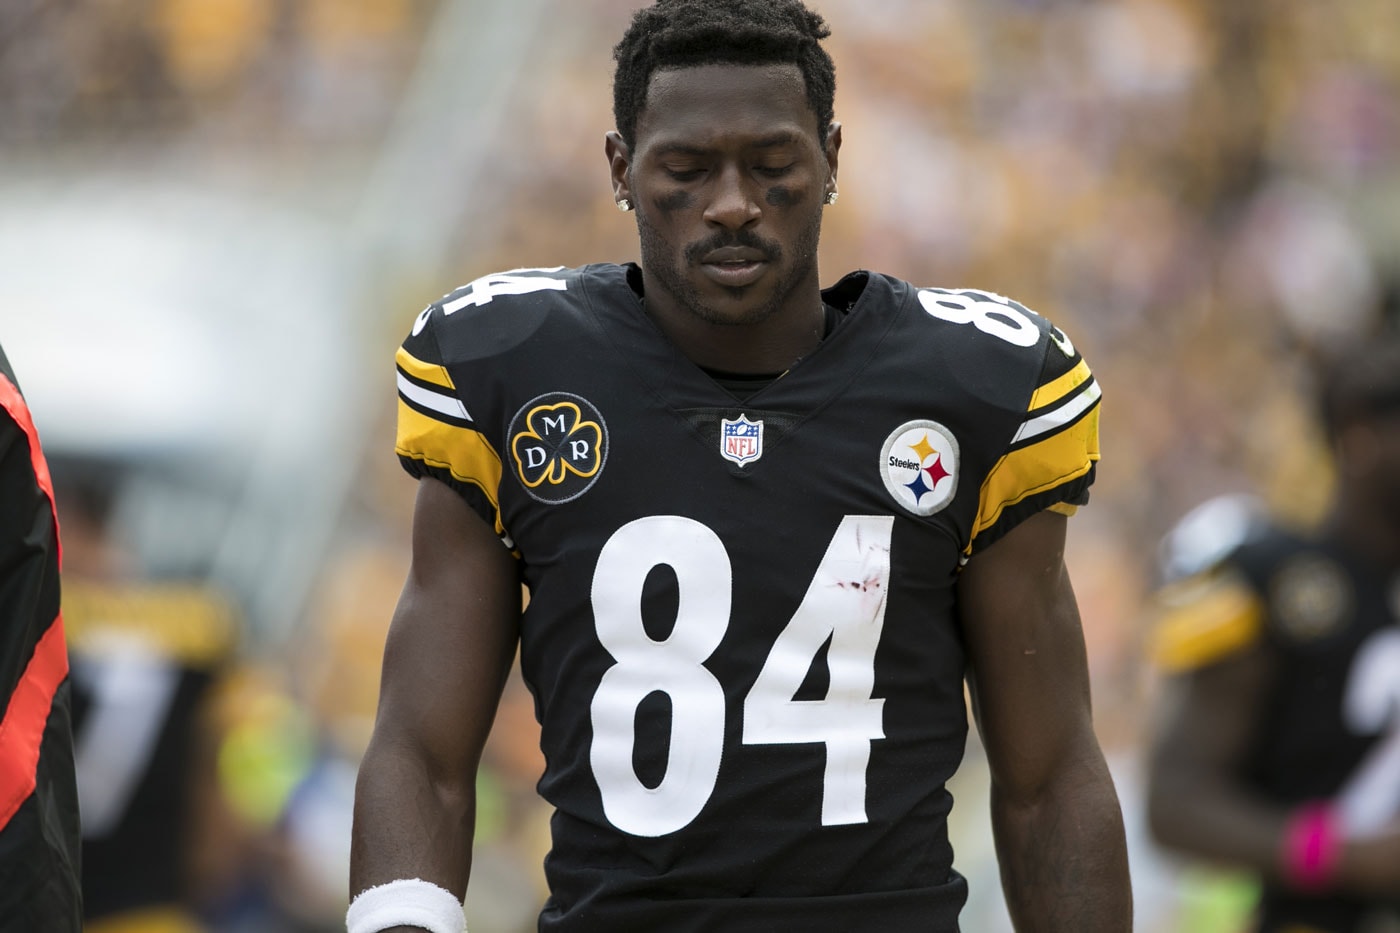 Antonio Brown Wants To Retire With the Pittsburgh Steelers nfl american football new england patriots tampa bay buccaneers donda academy donda sports kanye west music rapper tom brady oakland raiders tampa bay buccaneers new england patriots